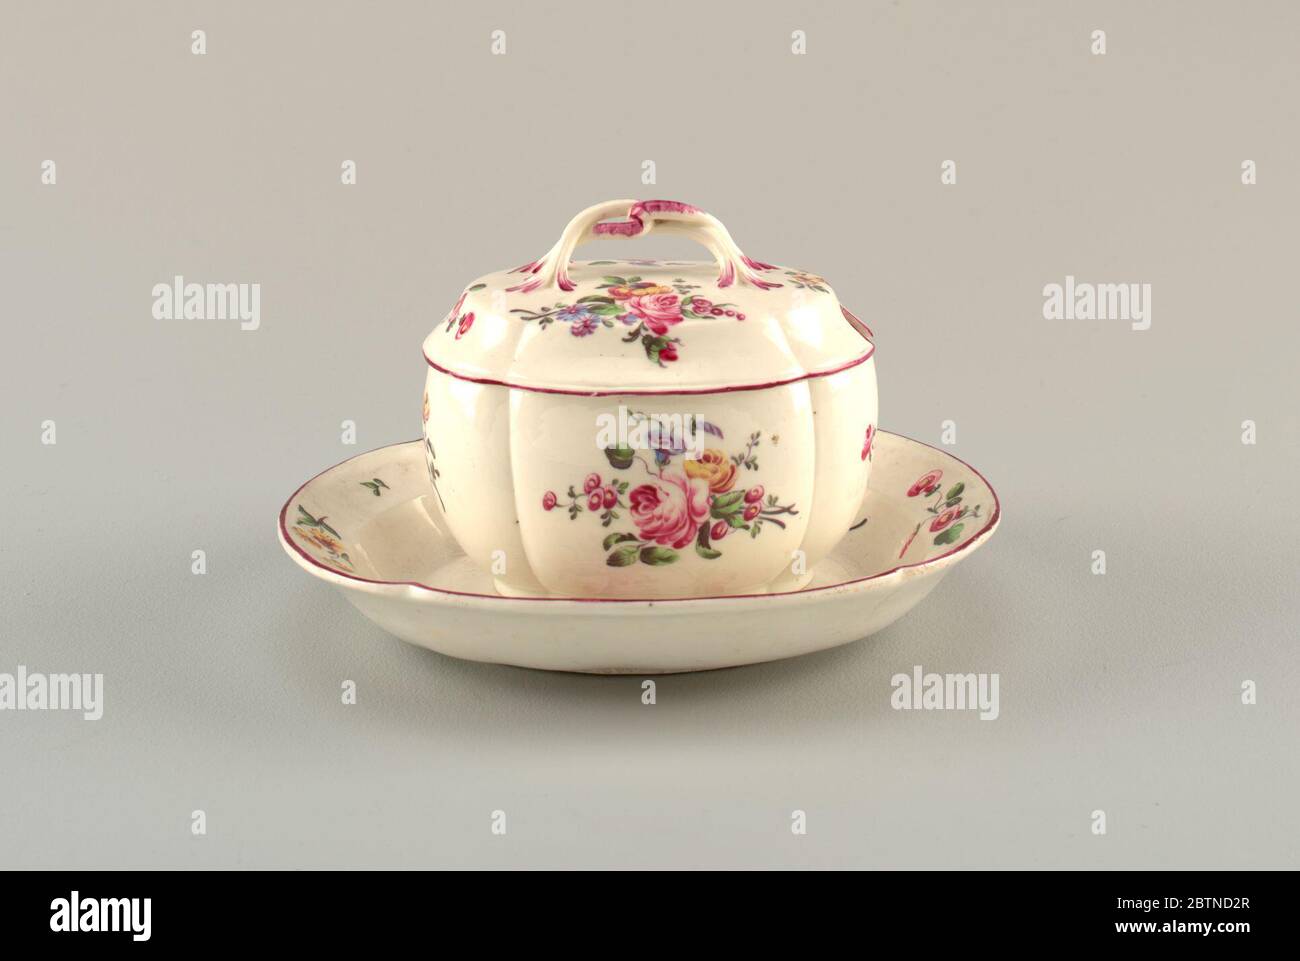 Sugar Bowl and Stand with Flowers. Research in ProgressRound bowl with large scalloped edges; lid has plant form loop handle. Lid rim is painted in deep purple. Decorated with deep pink-purple, yellow and blue blossoms and green leaves and stems on white background. Bowl's interior has painted green leaf. Stock Photo